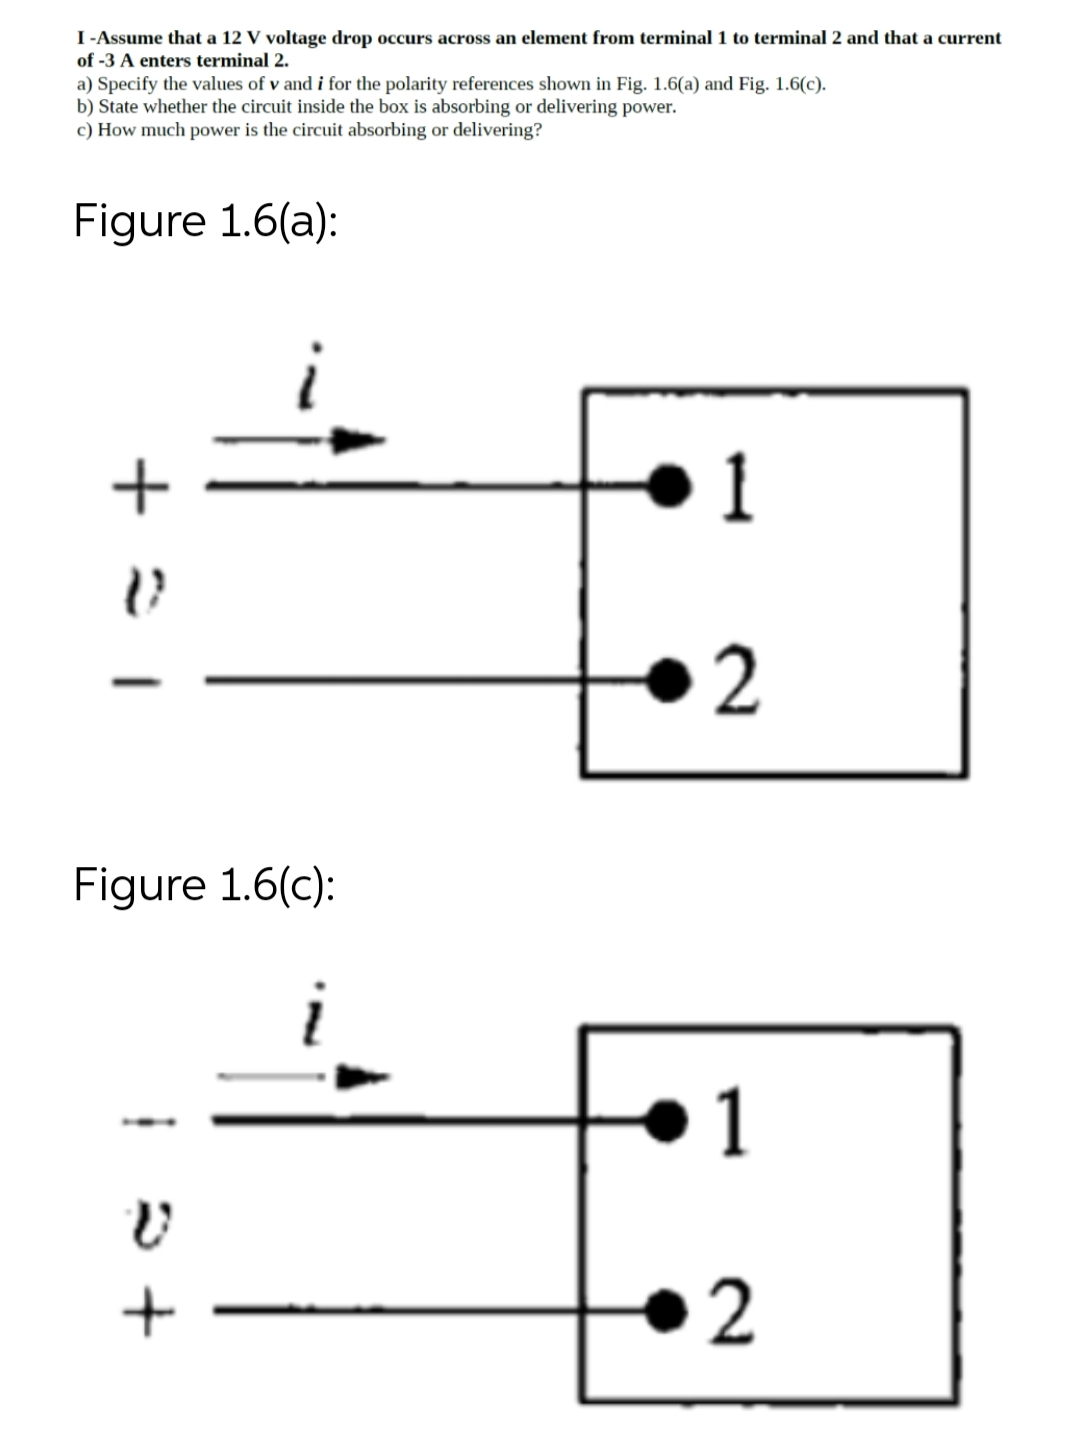 I -Assume that a 12 V voltage drop occurs across an element from terminal 1 to terminal 2 and that a current
of -3 A enters terminal 2.
a) Specify the values of v and i for the polarity references shown in Fig. 1.6(a) and Fig. 1.6(c).
b) State whether the circuit inside the box is absorbing or delivering power.
c) How much power is the circuit absorbing or delivering?
Figure 1.6(a):
+=
i
Figure 1.6(c):
V
+
1
2
1
2